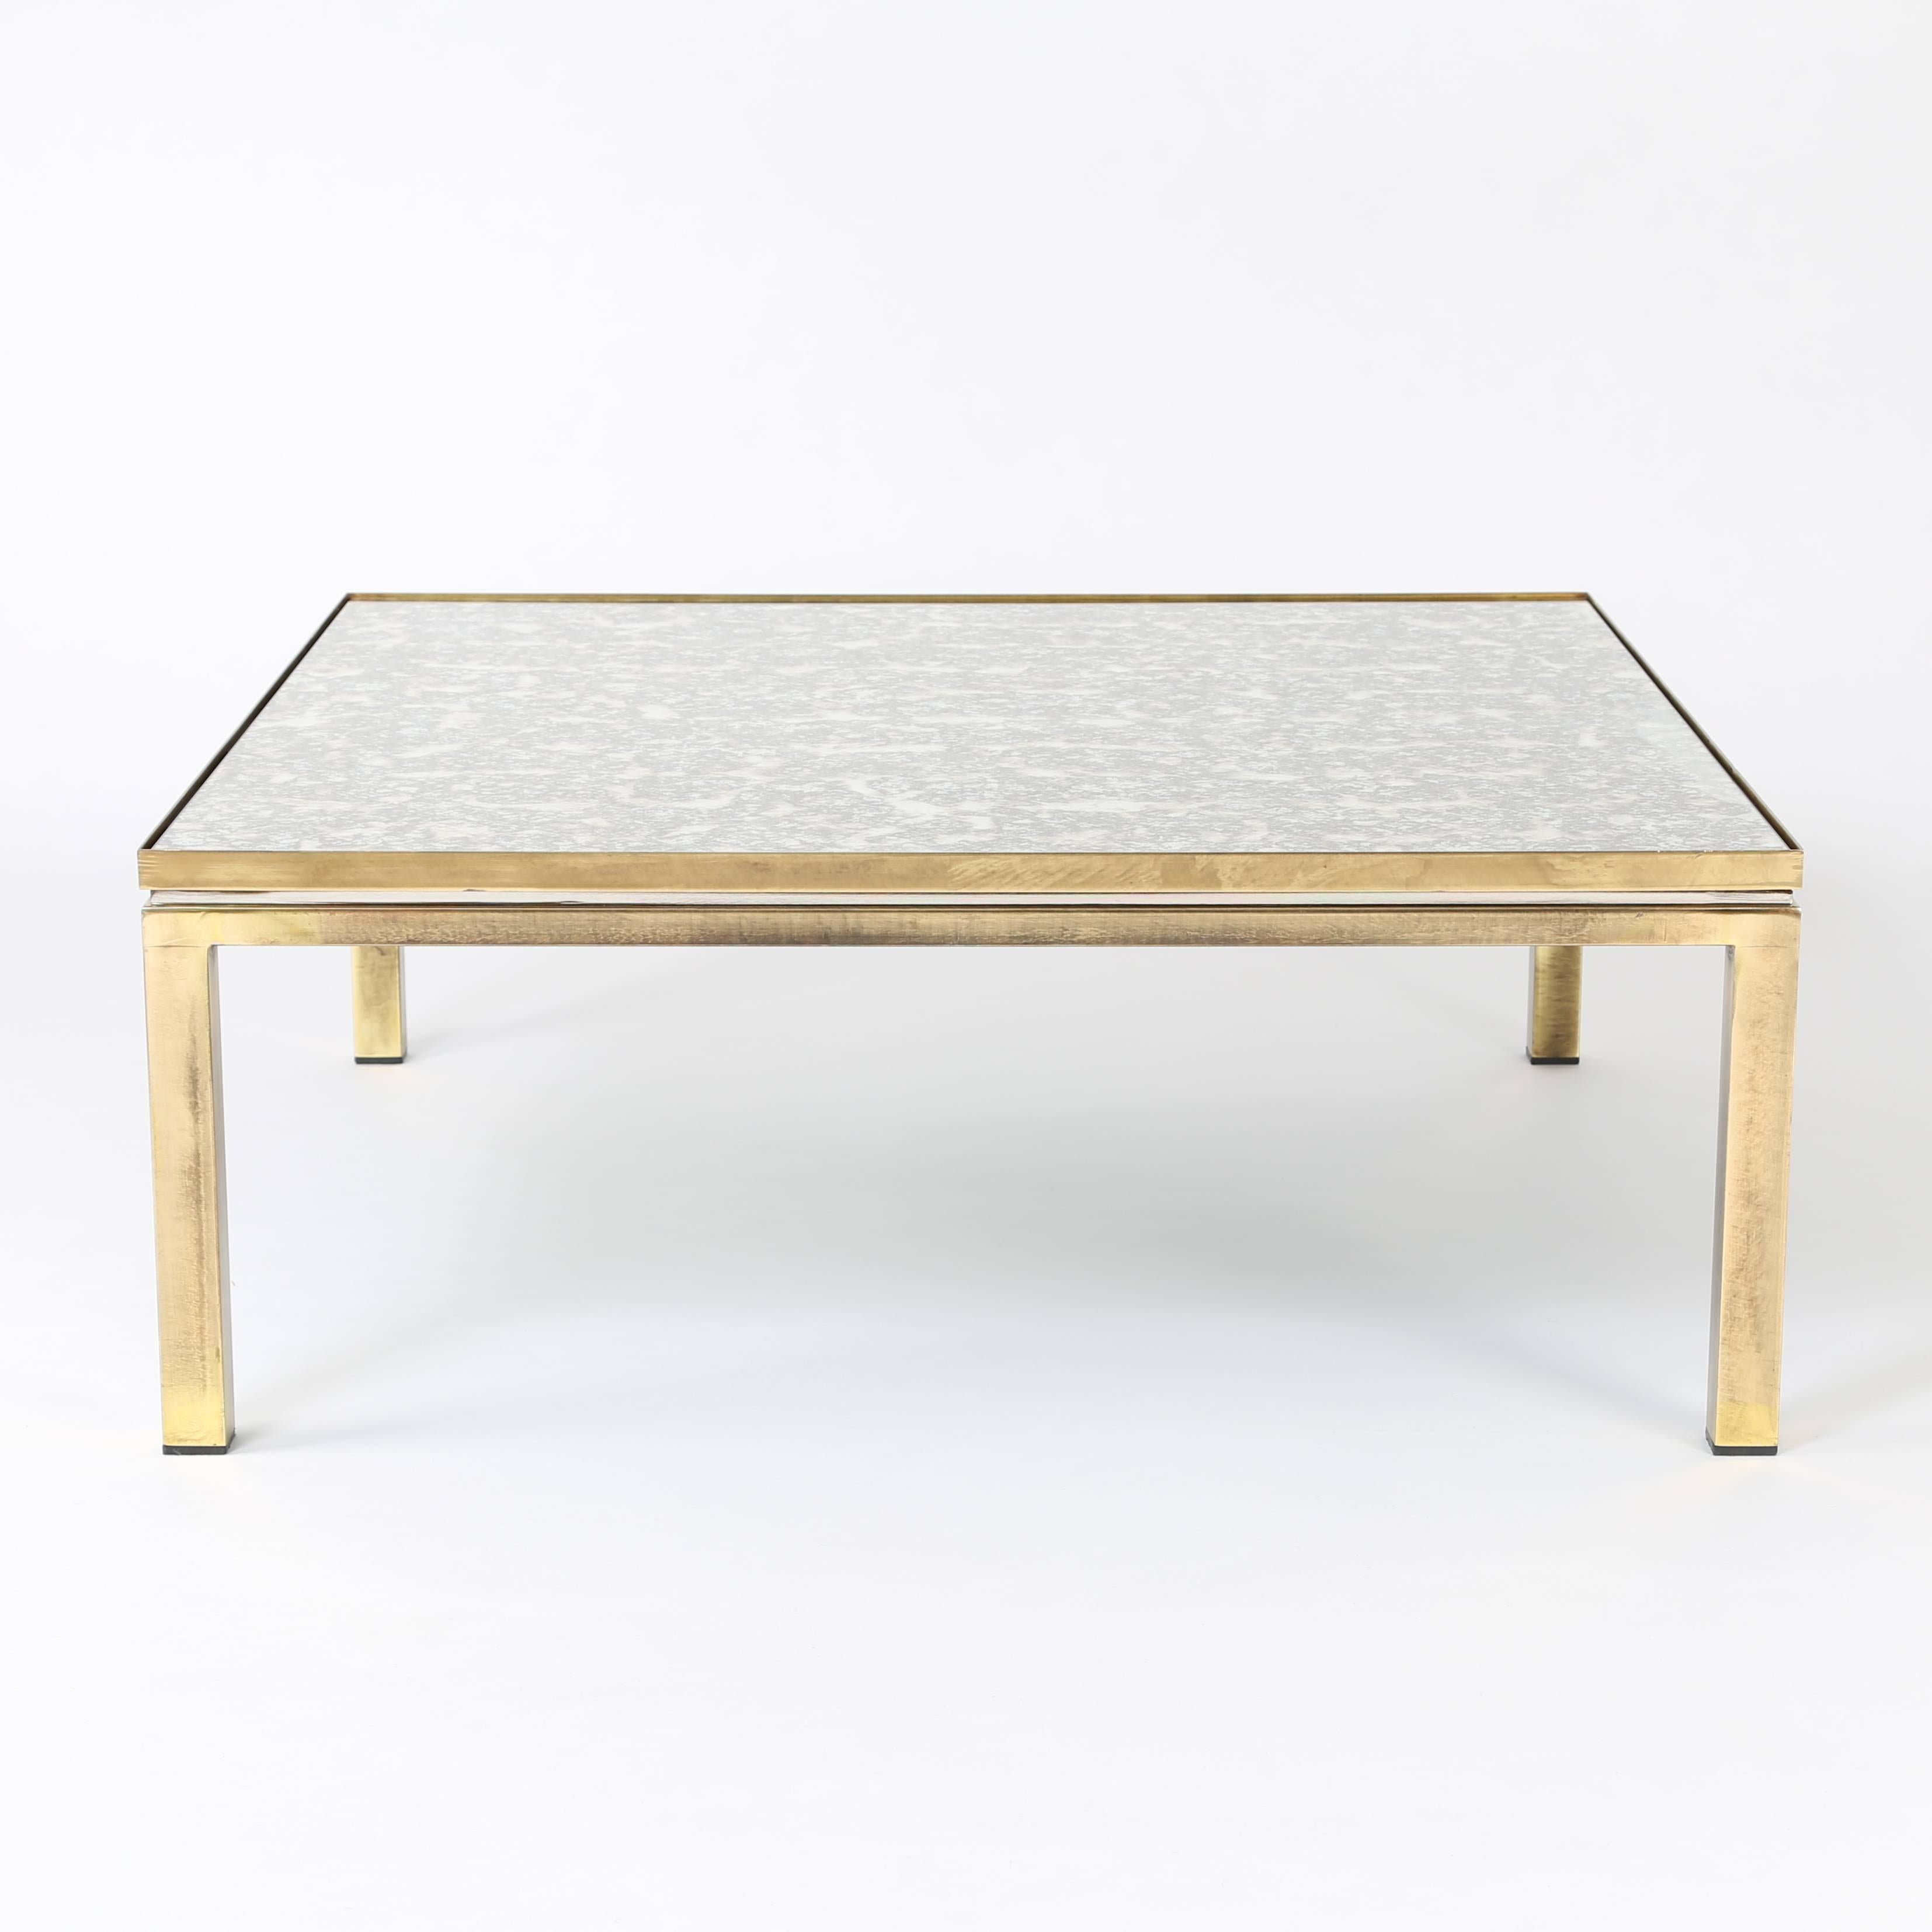 Exquisite 1970s Italian coffee table with antiqued mirror top set in a patinated-brass frame and raised on four square legs. Reveal between lower and upper frame is lined in polished chrome to give the table added depth. "Made in Italy"